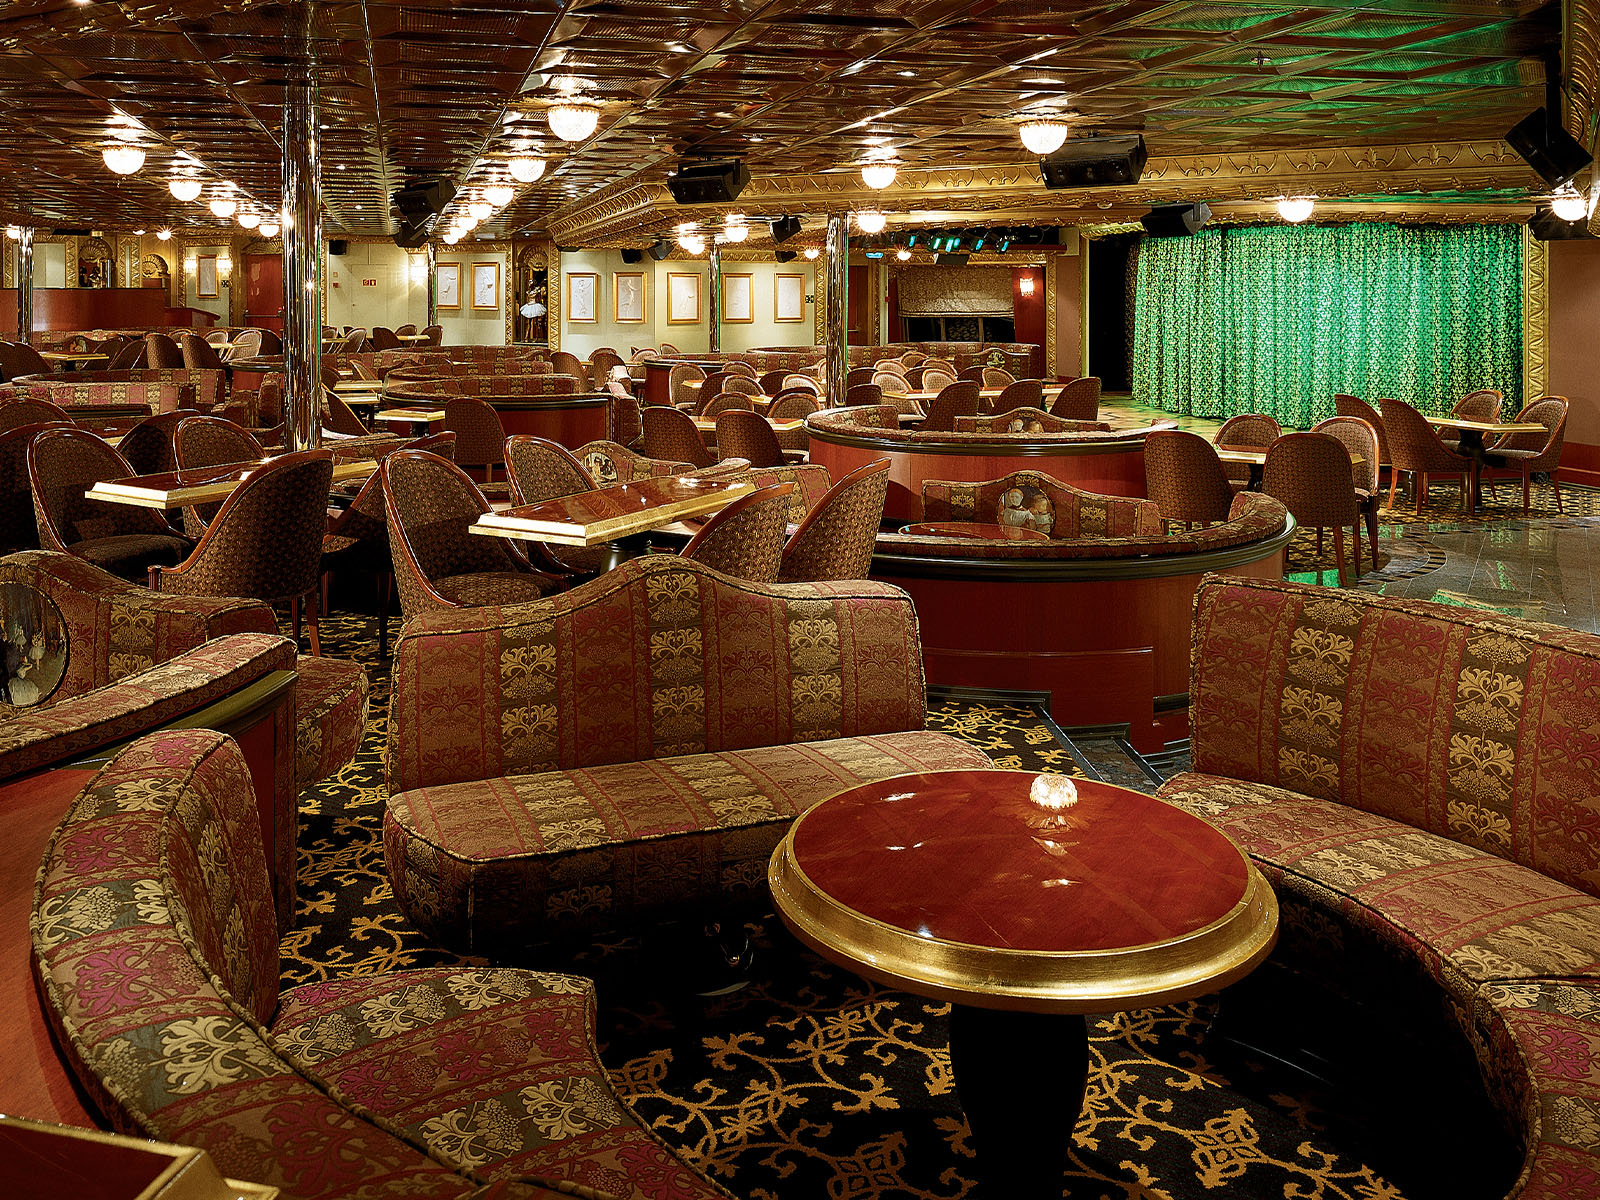 Degas Lounge on the Carnival Conquest